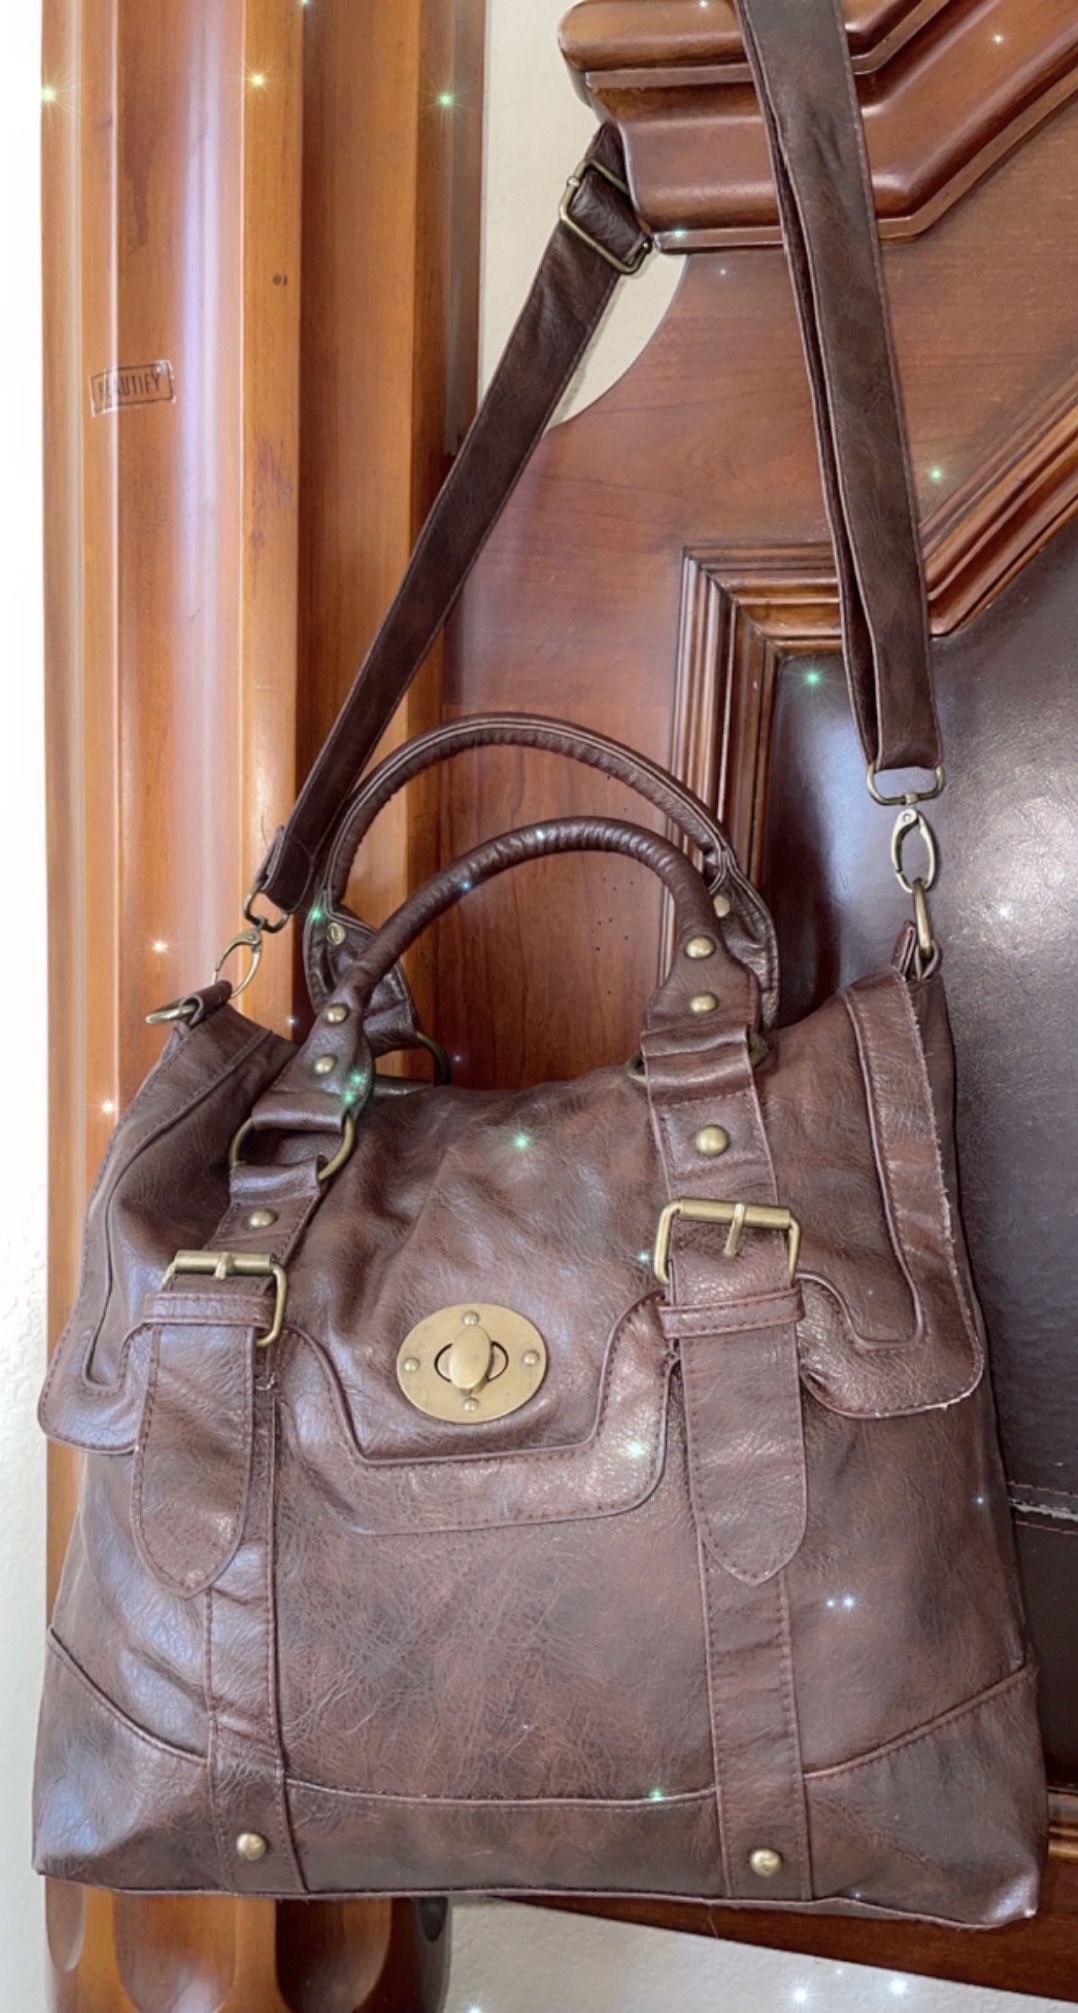 leather Tote purse/bag in Chocolate brown